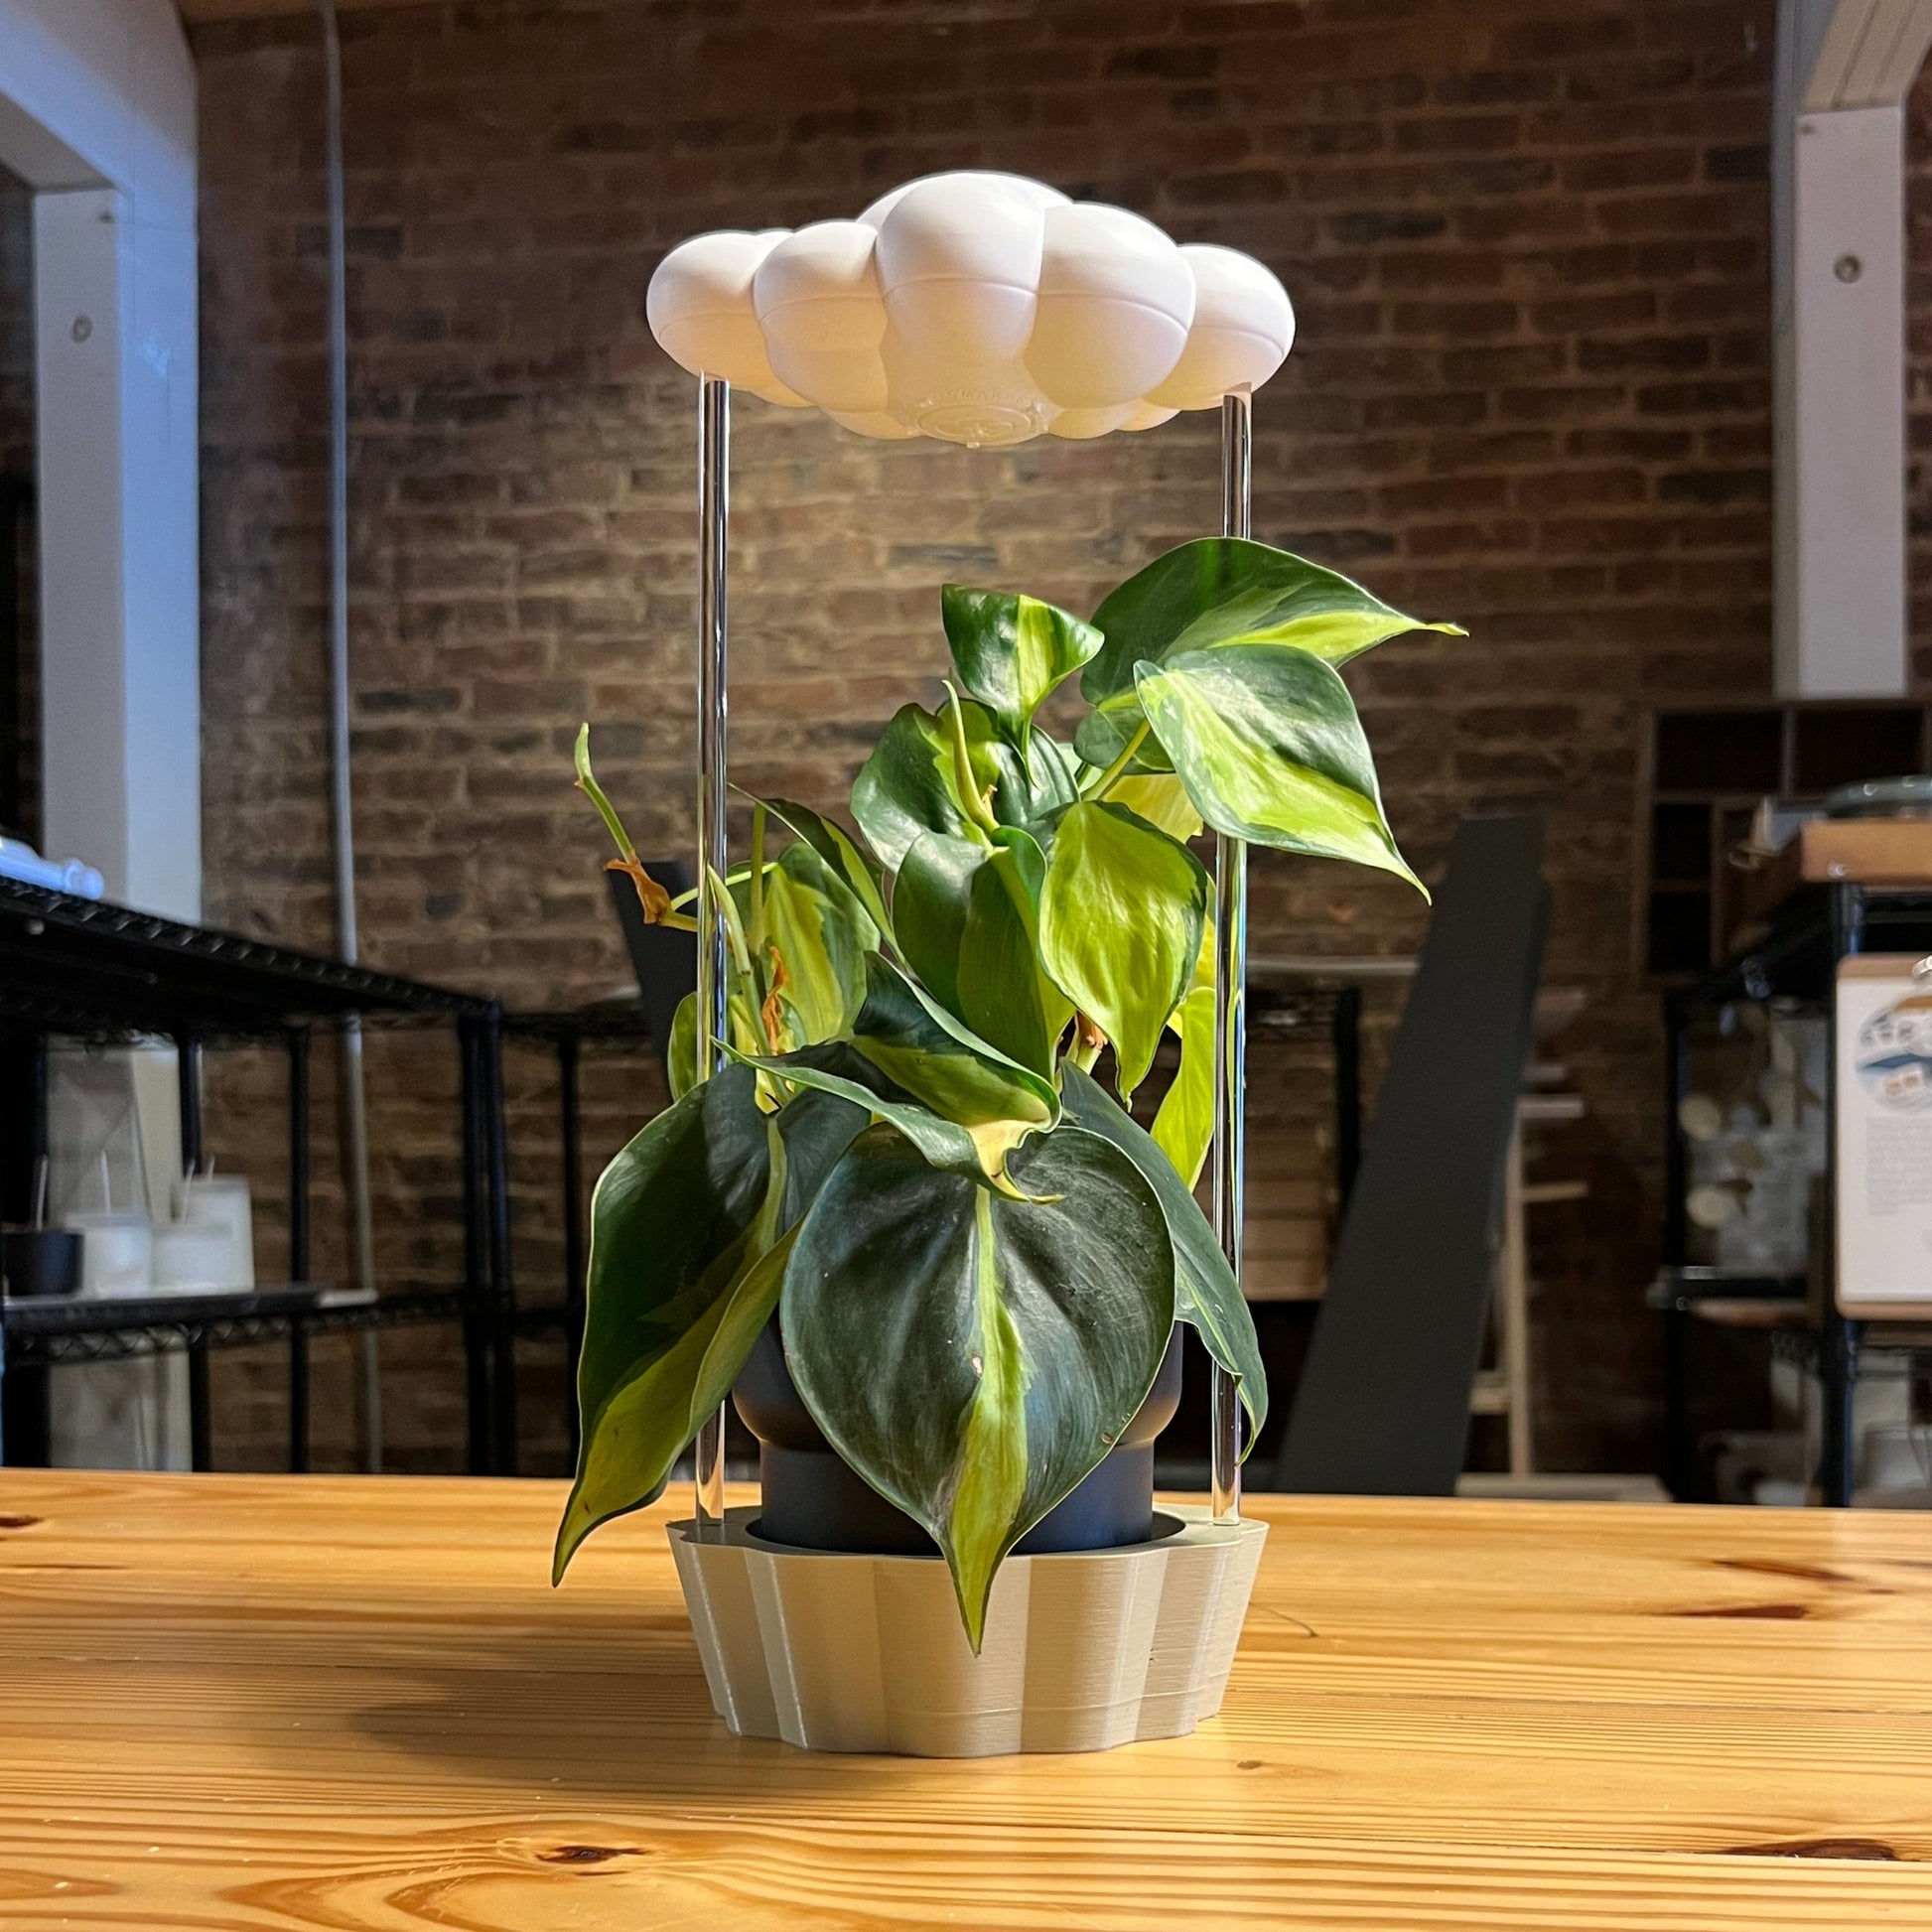 Original Dripping rain cloud by THE CLOUD MAKERS with Tan Stand